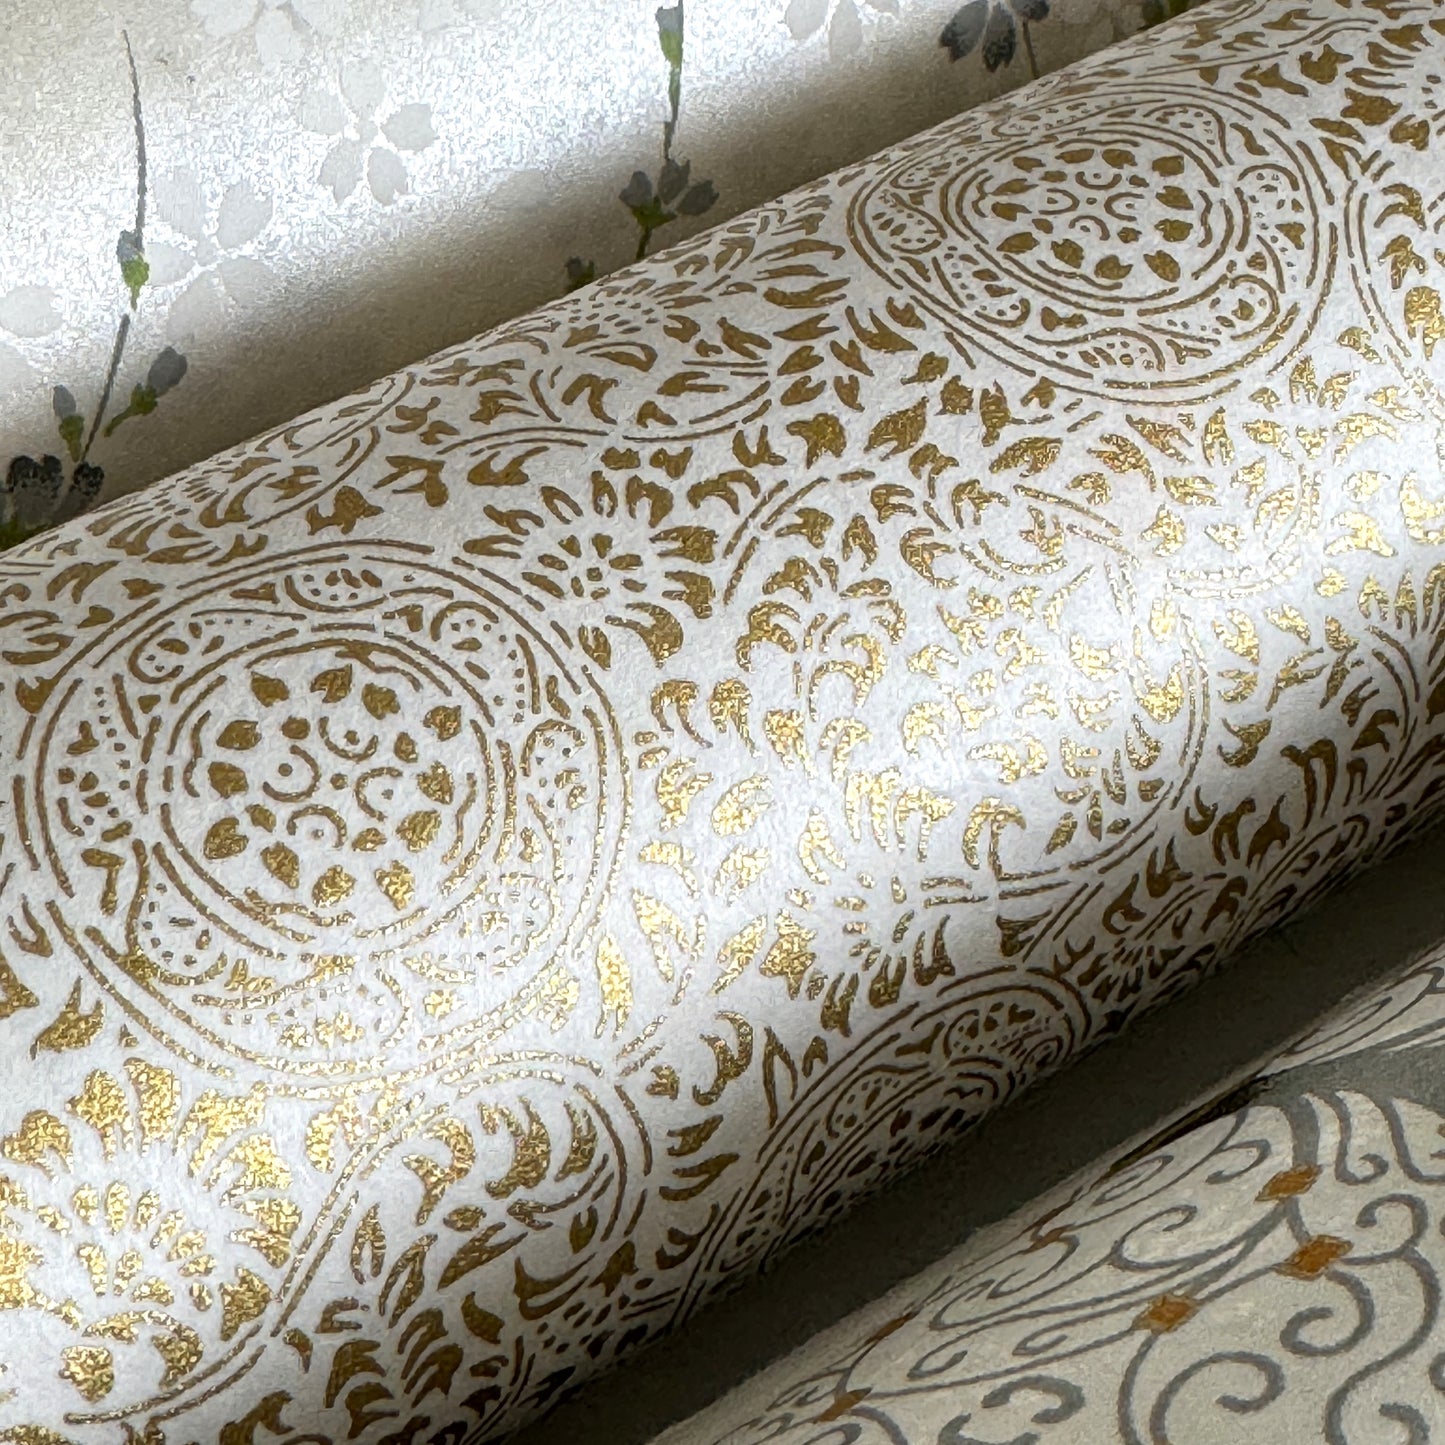 Japanese silkscreen chiyogami paper with an intricate floral pattern in gold on ivory white. Close-up